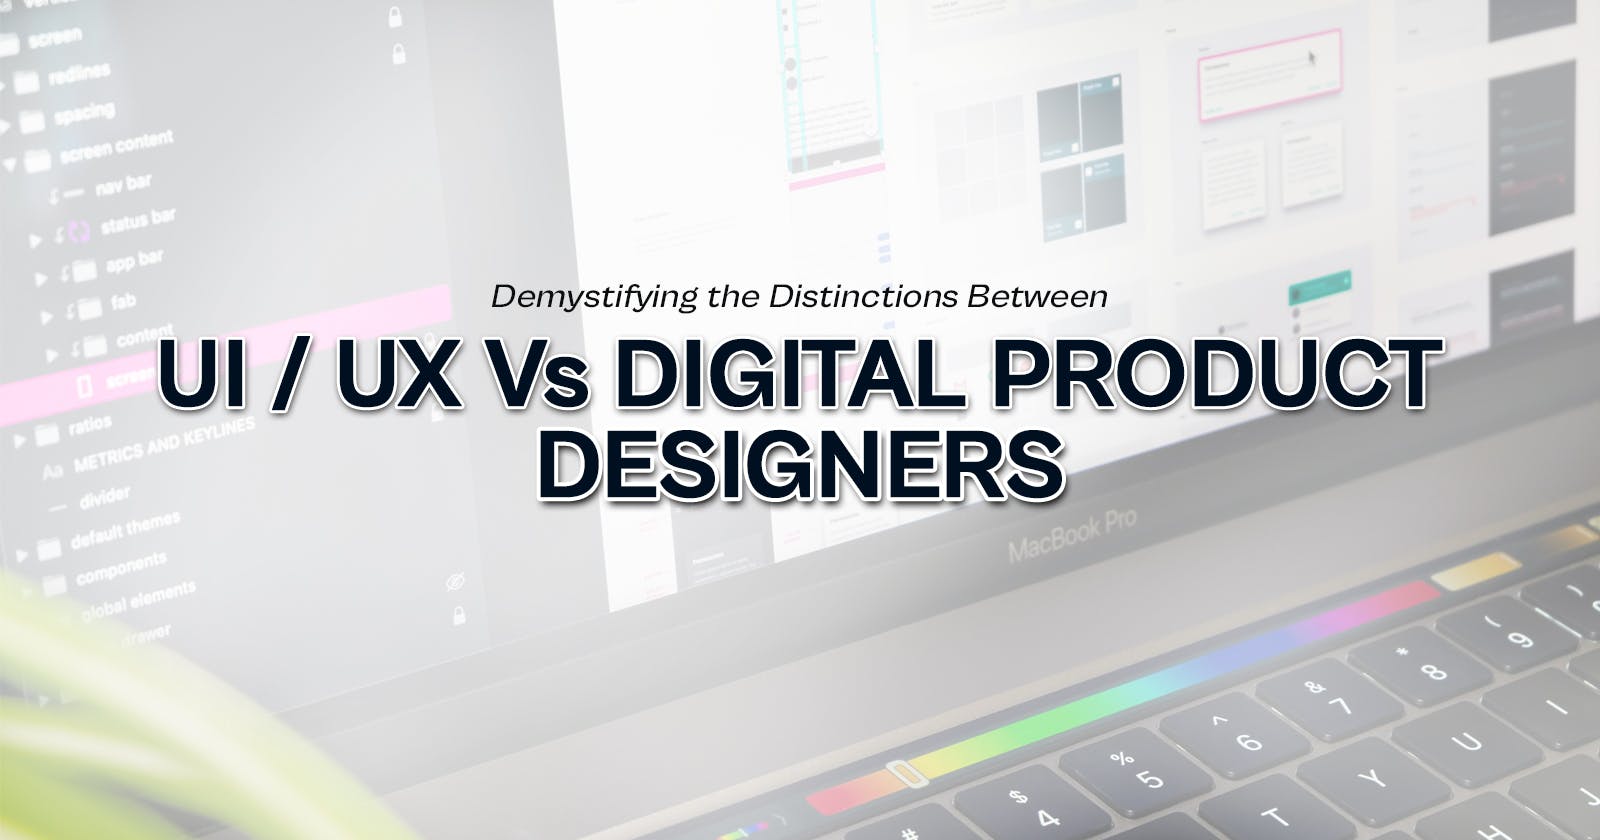 Demystifying the Distinctions Between UI/UX Designers and Digital Product Designers